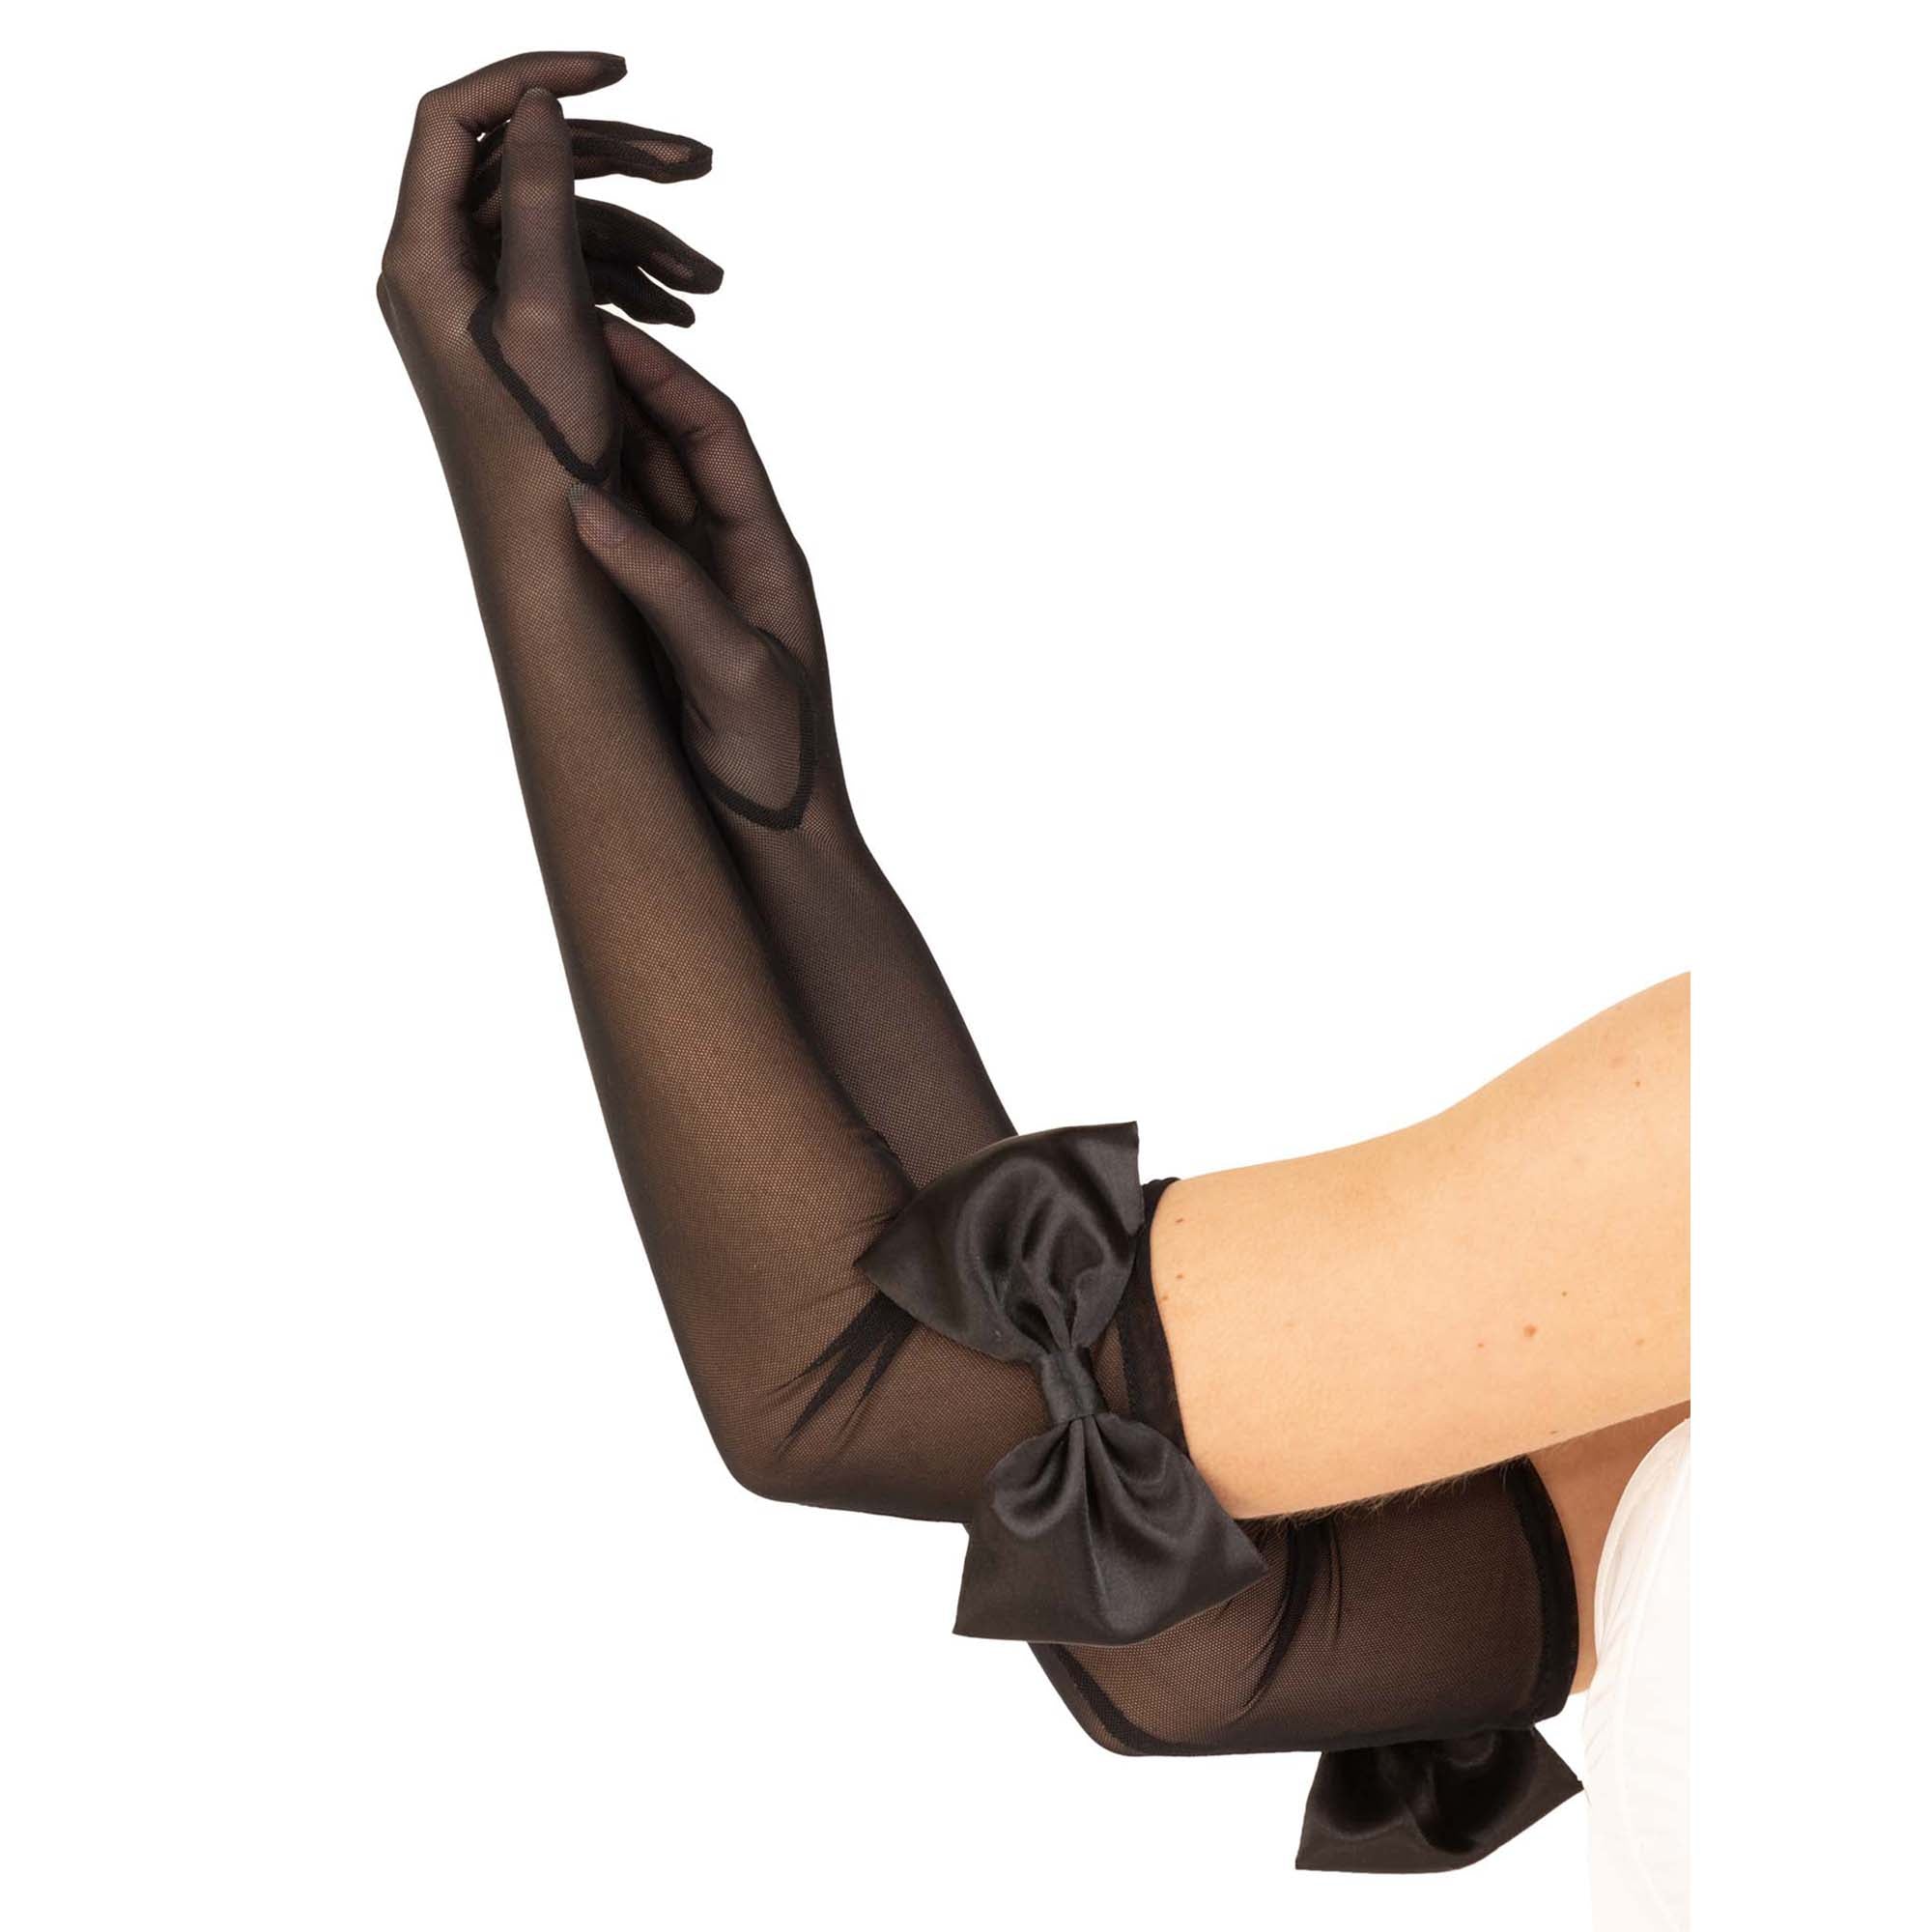 Black Opera Gloves With Bows for Adults, 1 Count